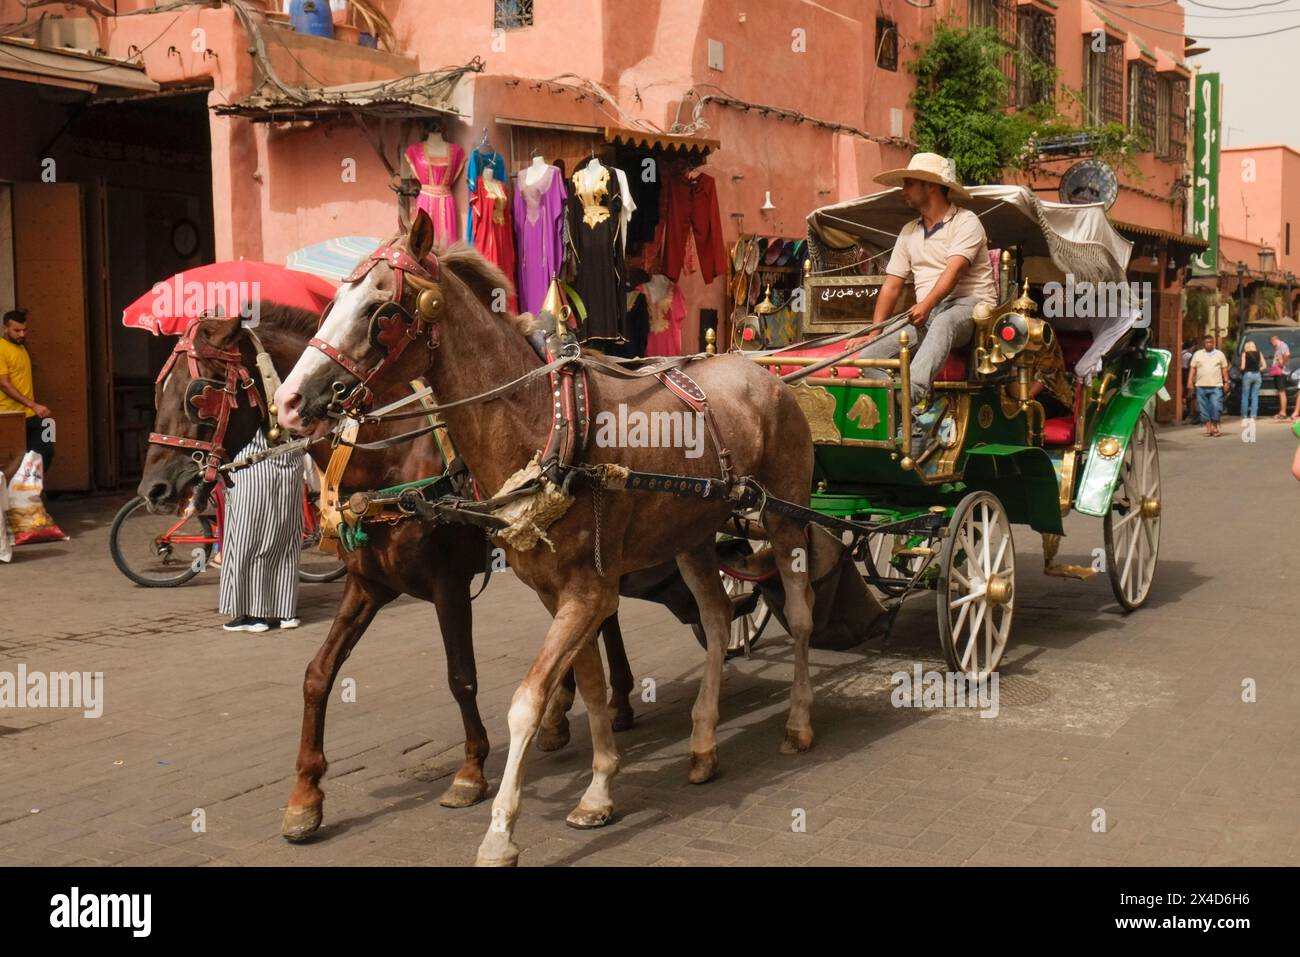 Marrakech, Morocco. Local provides a horse drawn carriage ride for tourists around the medina. (Editorial Use Only) Stock Photo